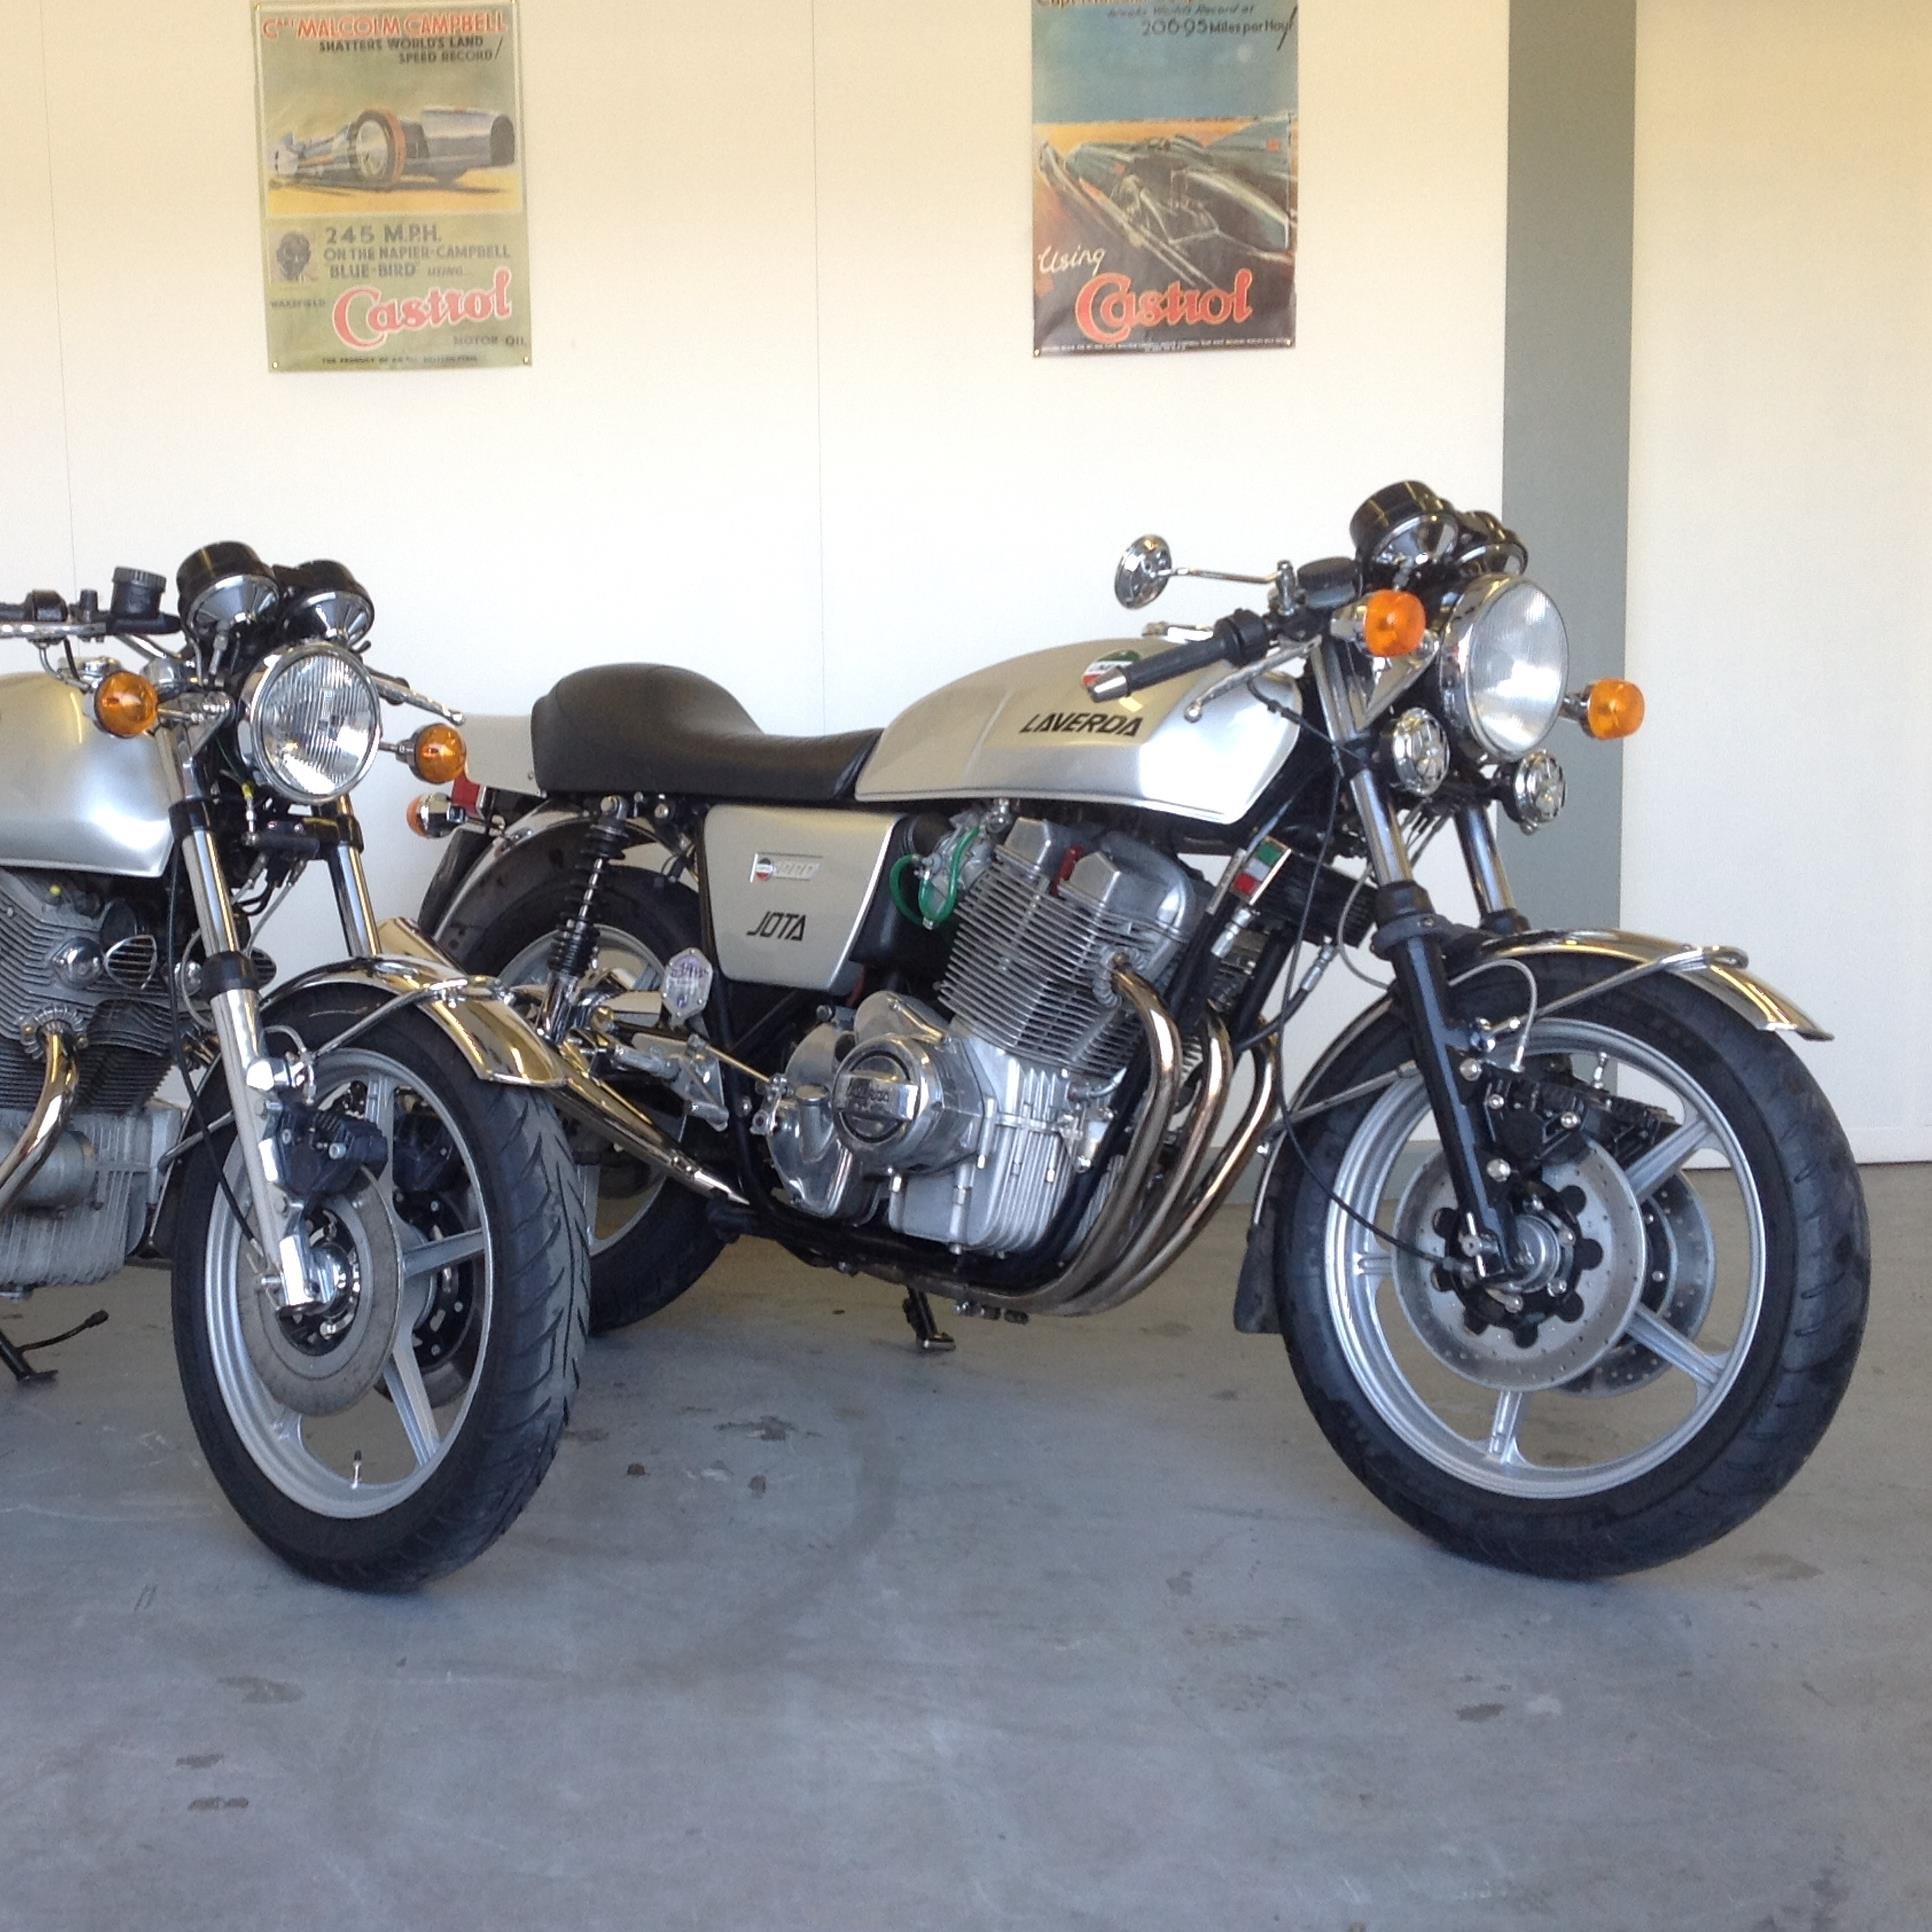 Richmond Classic Motorcycle Restoration - for restoration, repair, service of all type of classic or vintage motorcycle